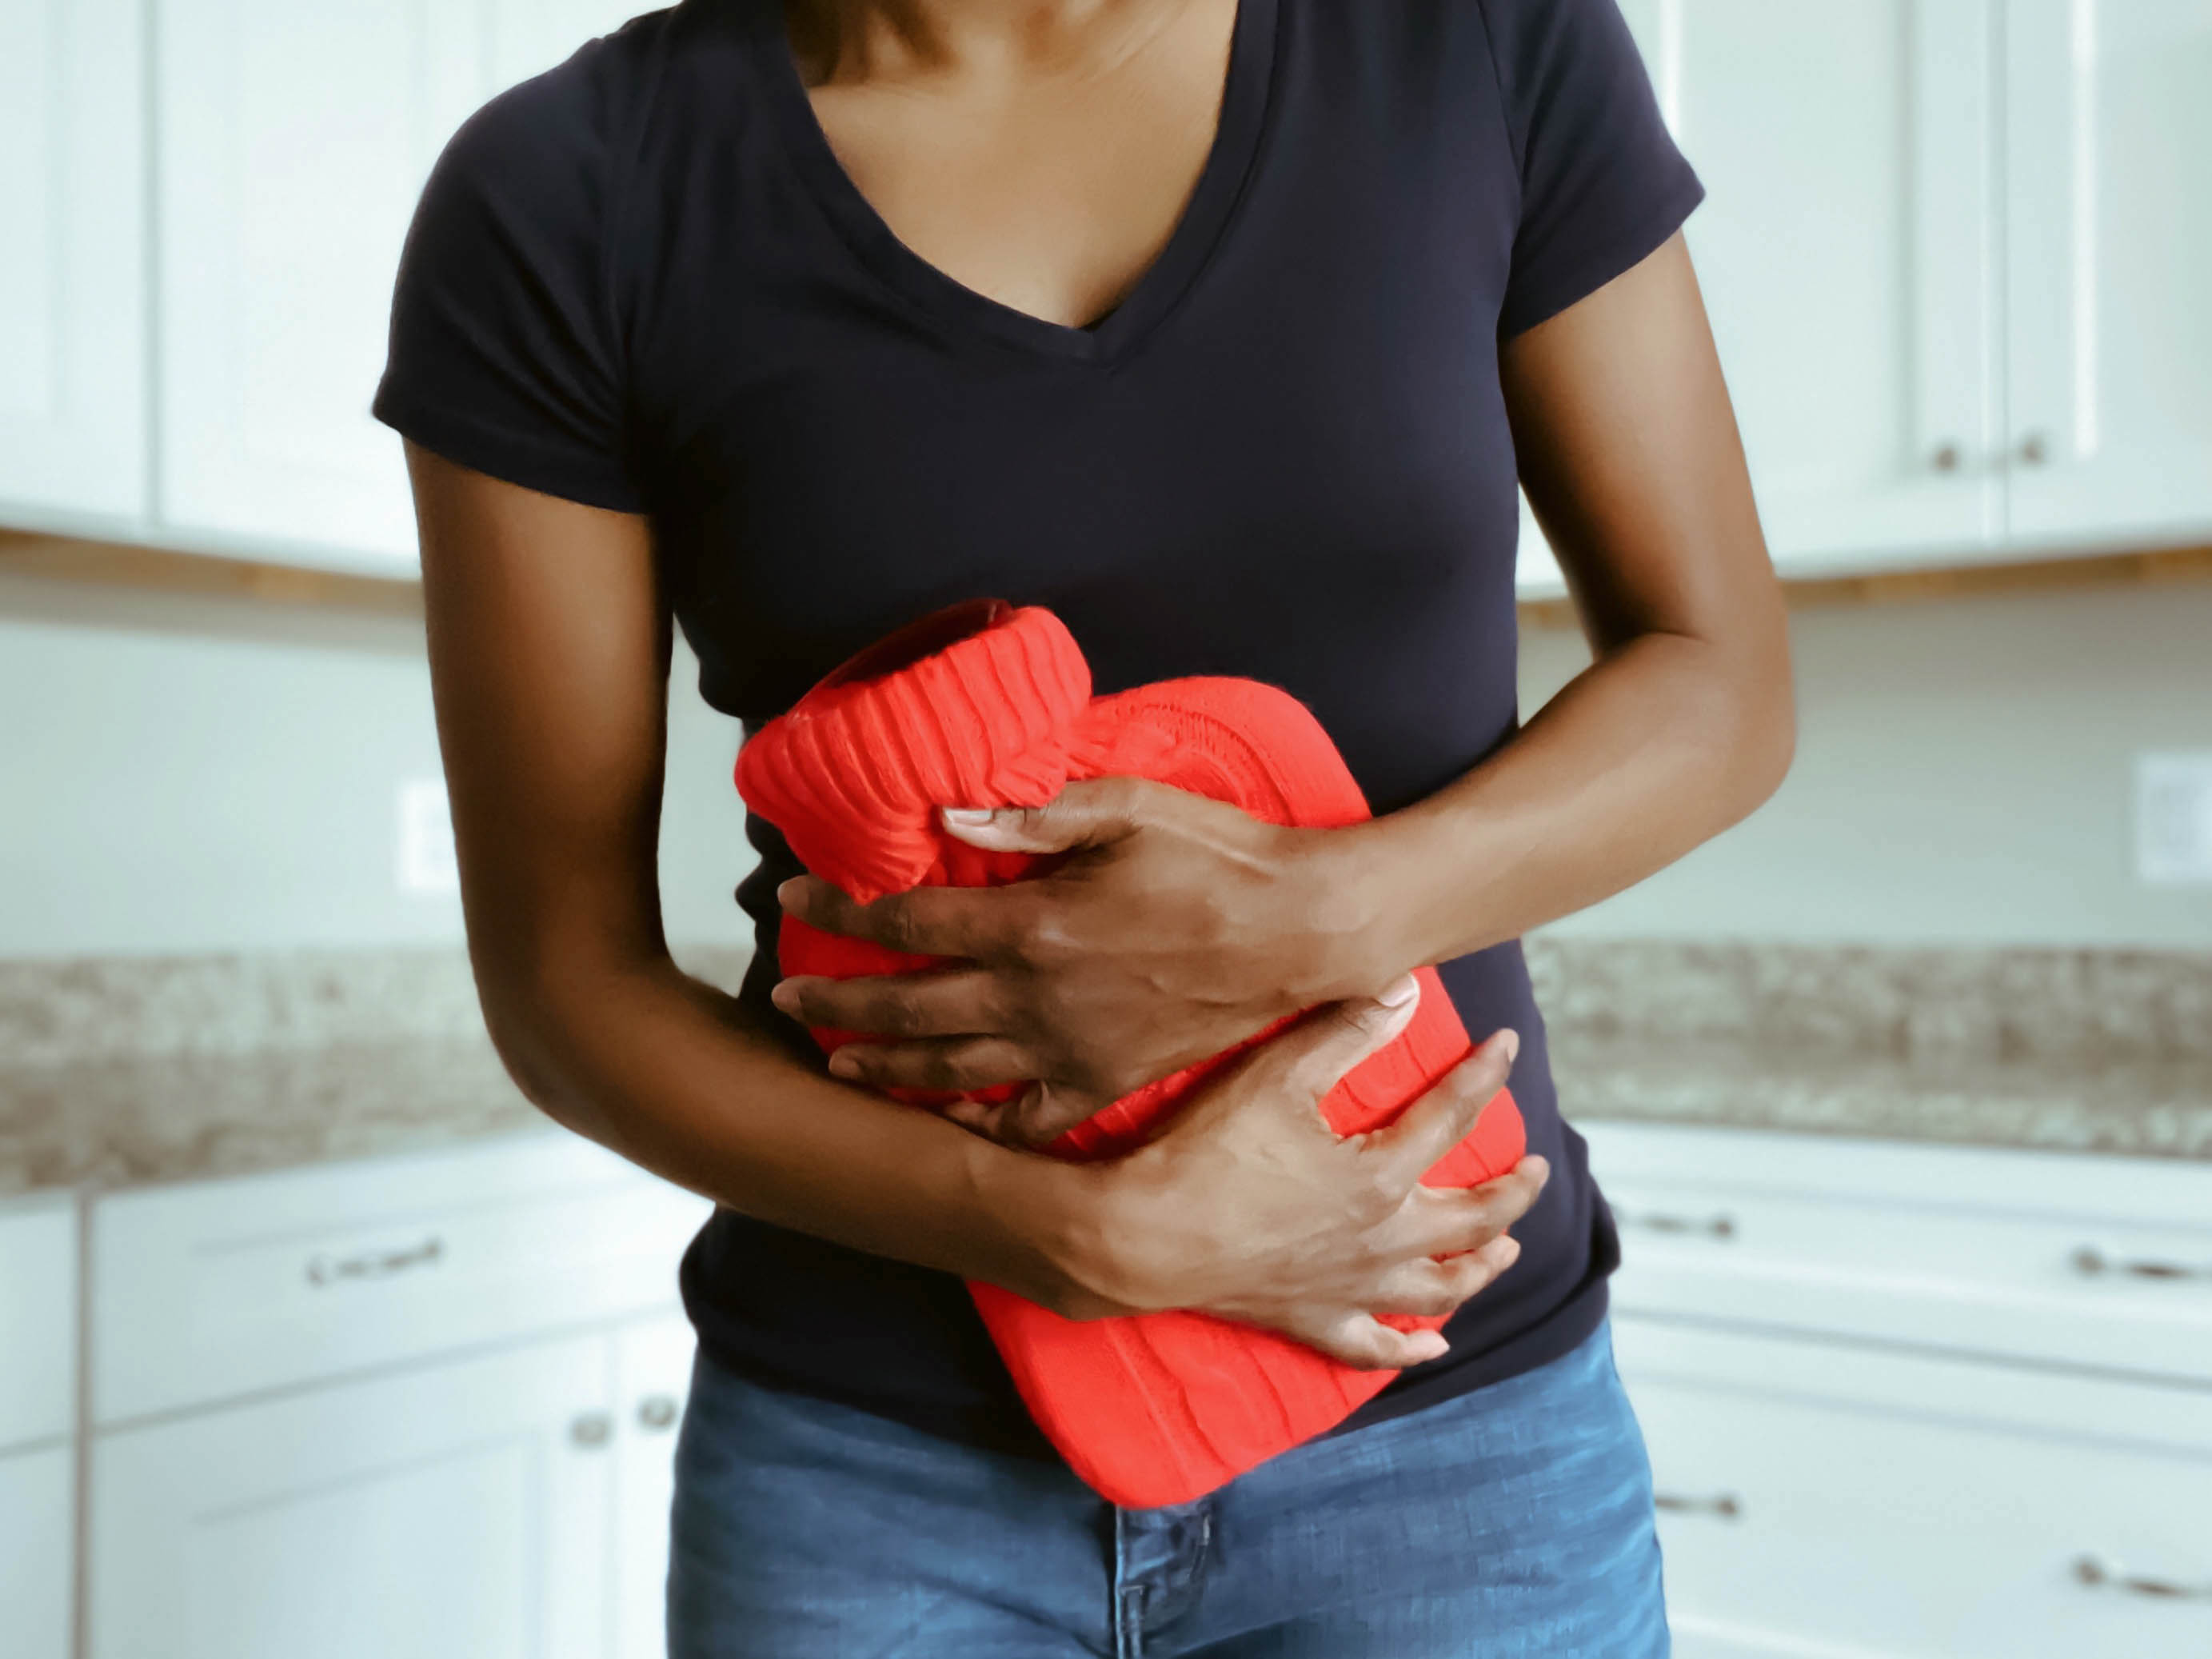 Person holding a bright red knitted item to their stomach in a kitchen